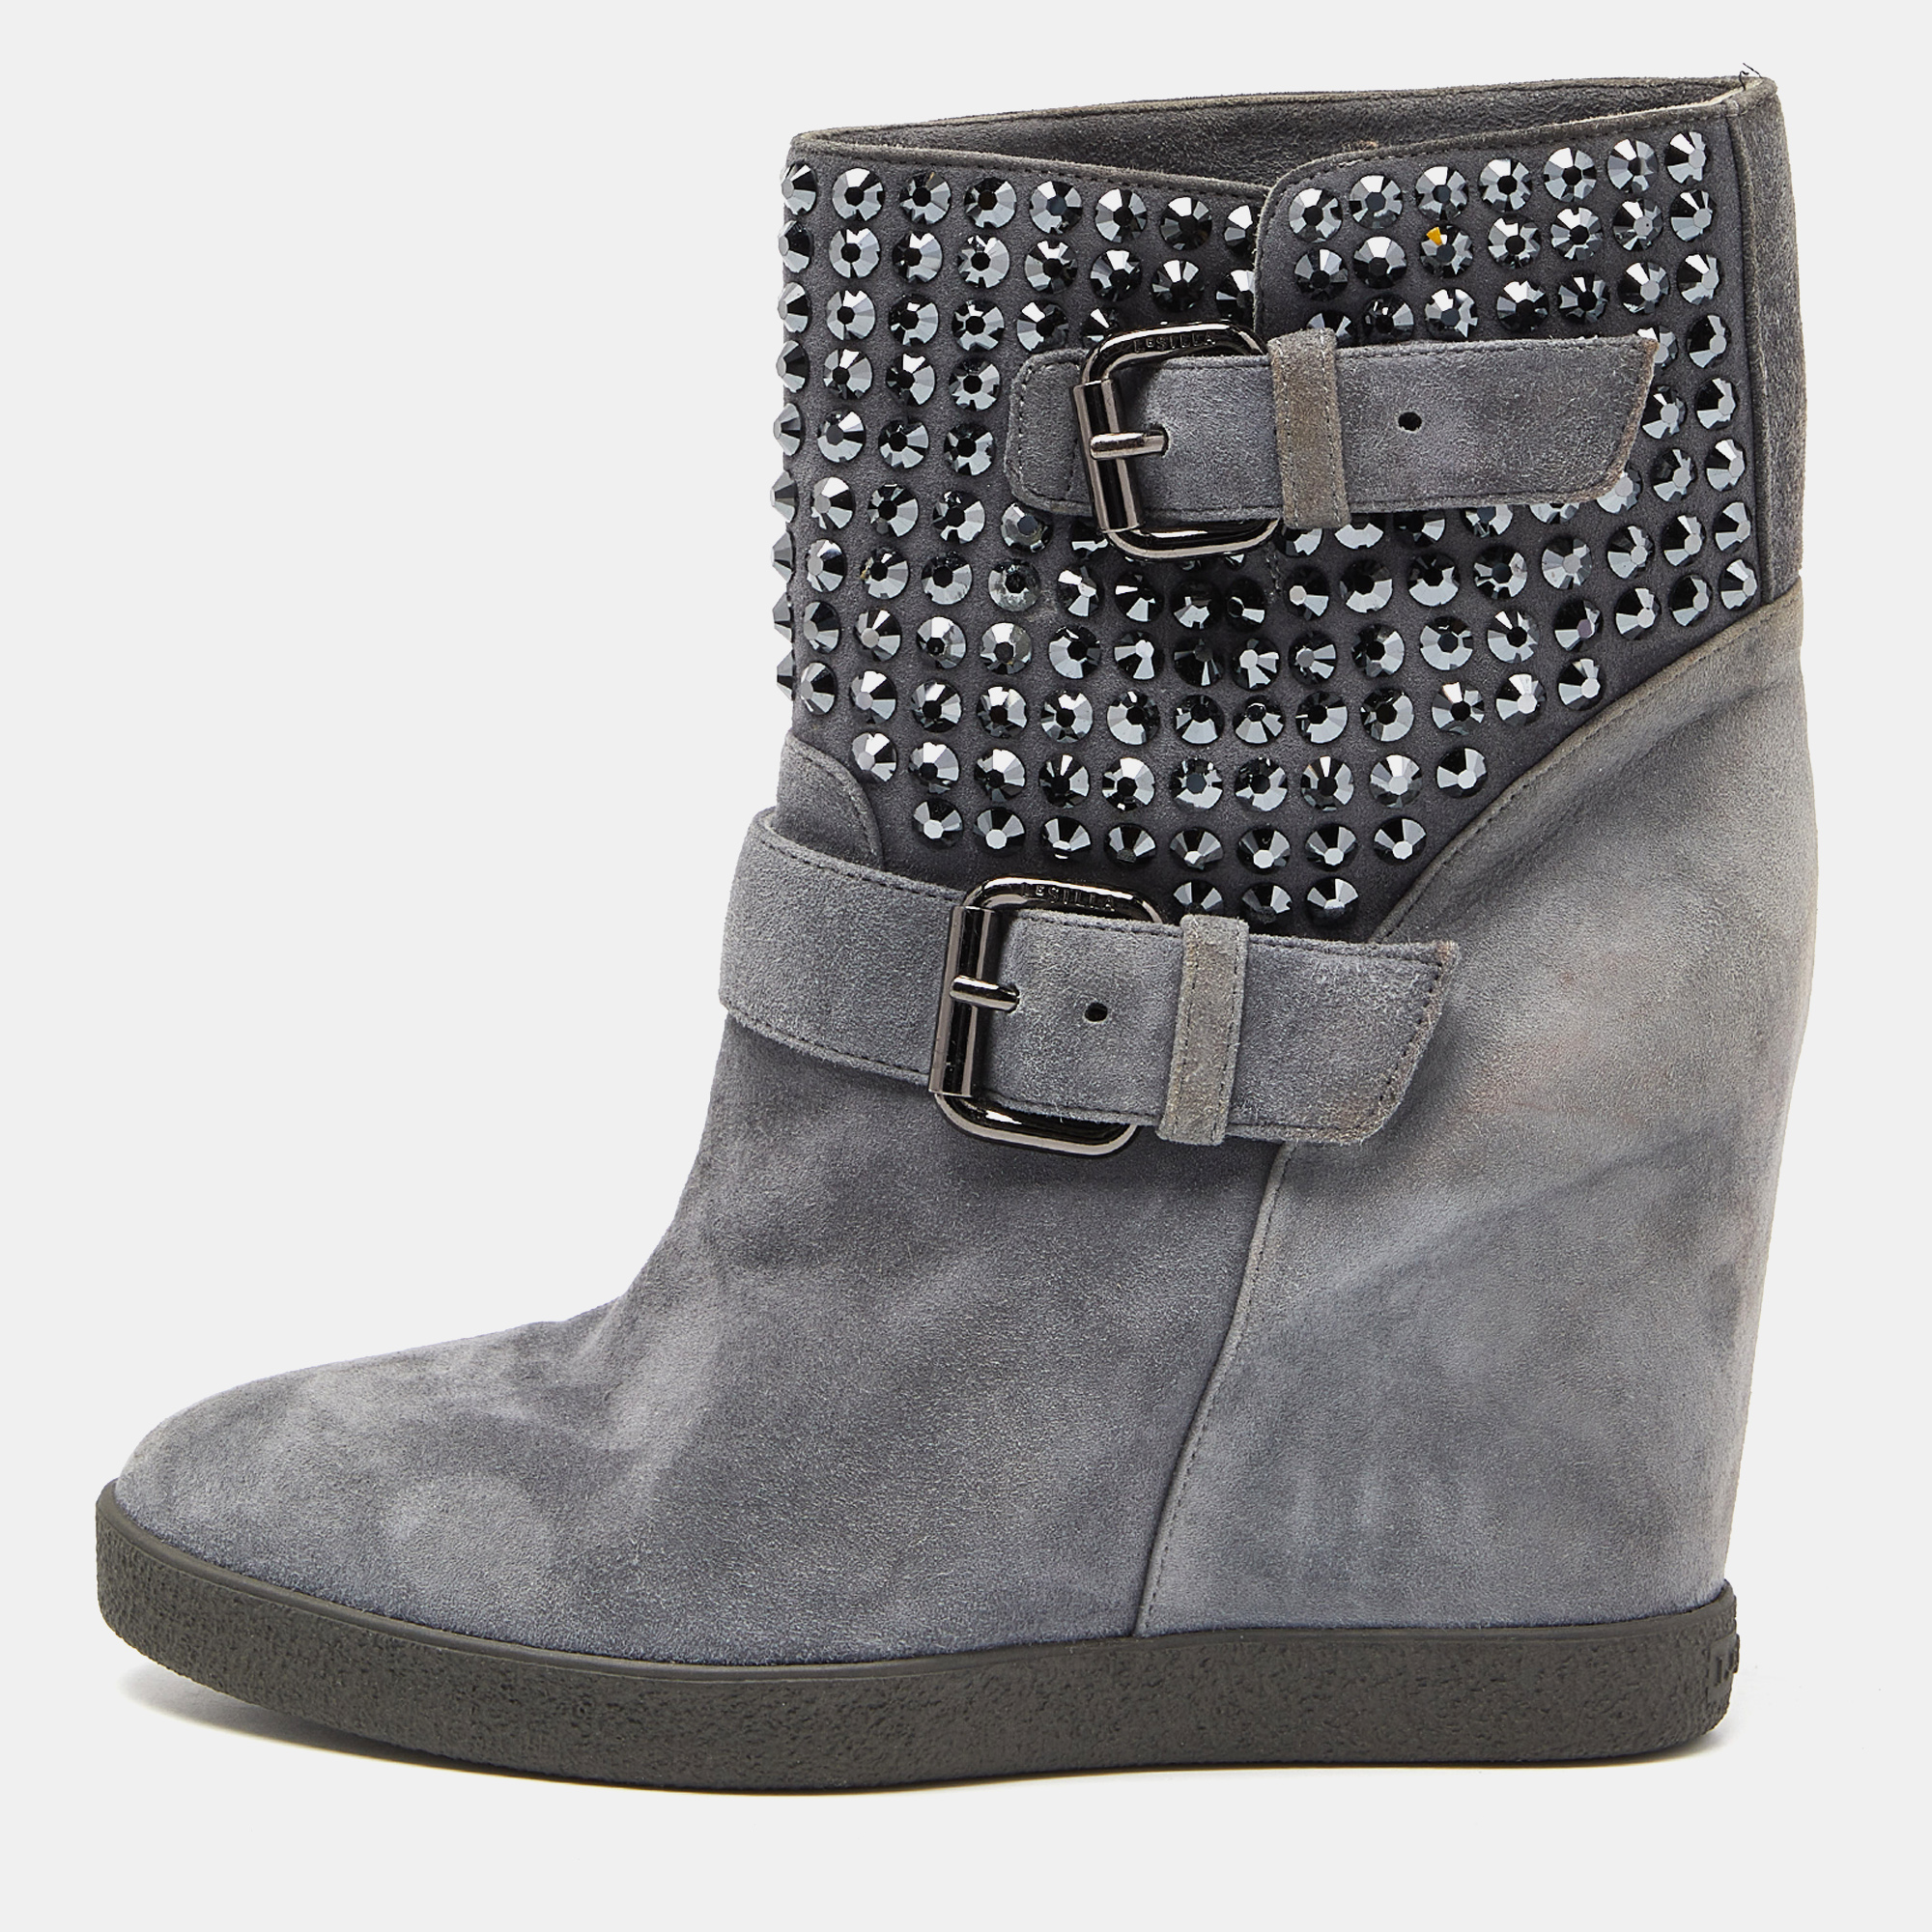 Pre-owned Le Silla Grey Suede Crystal Embellished Wedge Ankle Boots Size 38